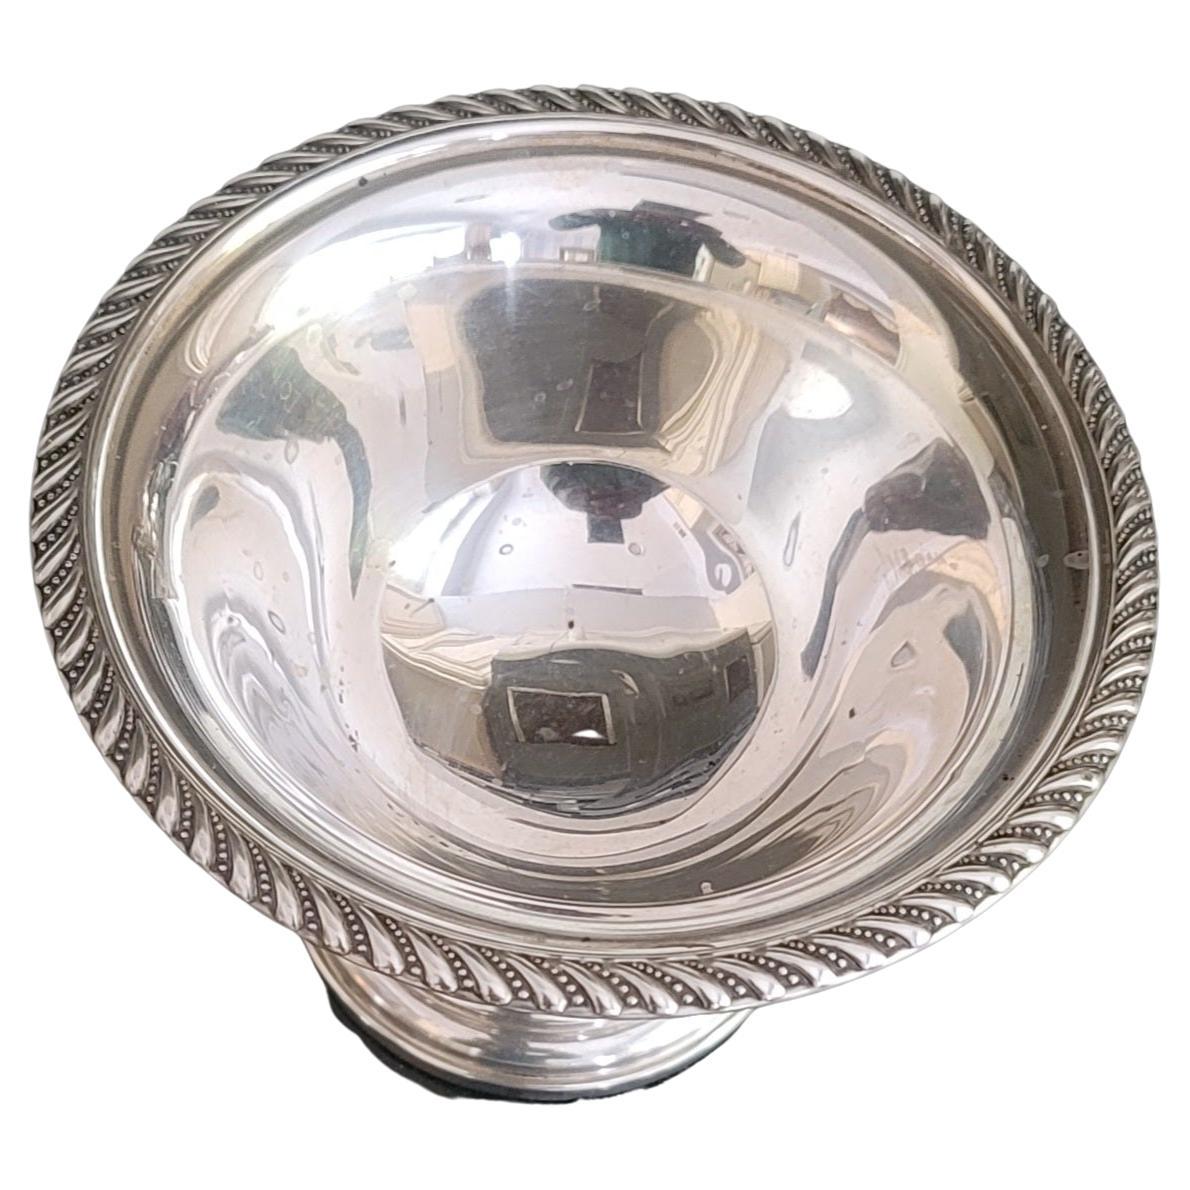 A Preisner Silver Company Footed and Weighted Sterling Silver Candy or Nut Dish with flower design rim, in good vintage condition.
Measures 5 1/8